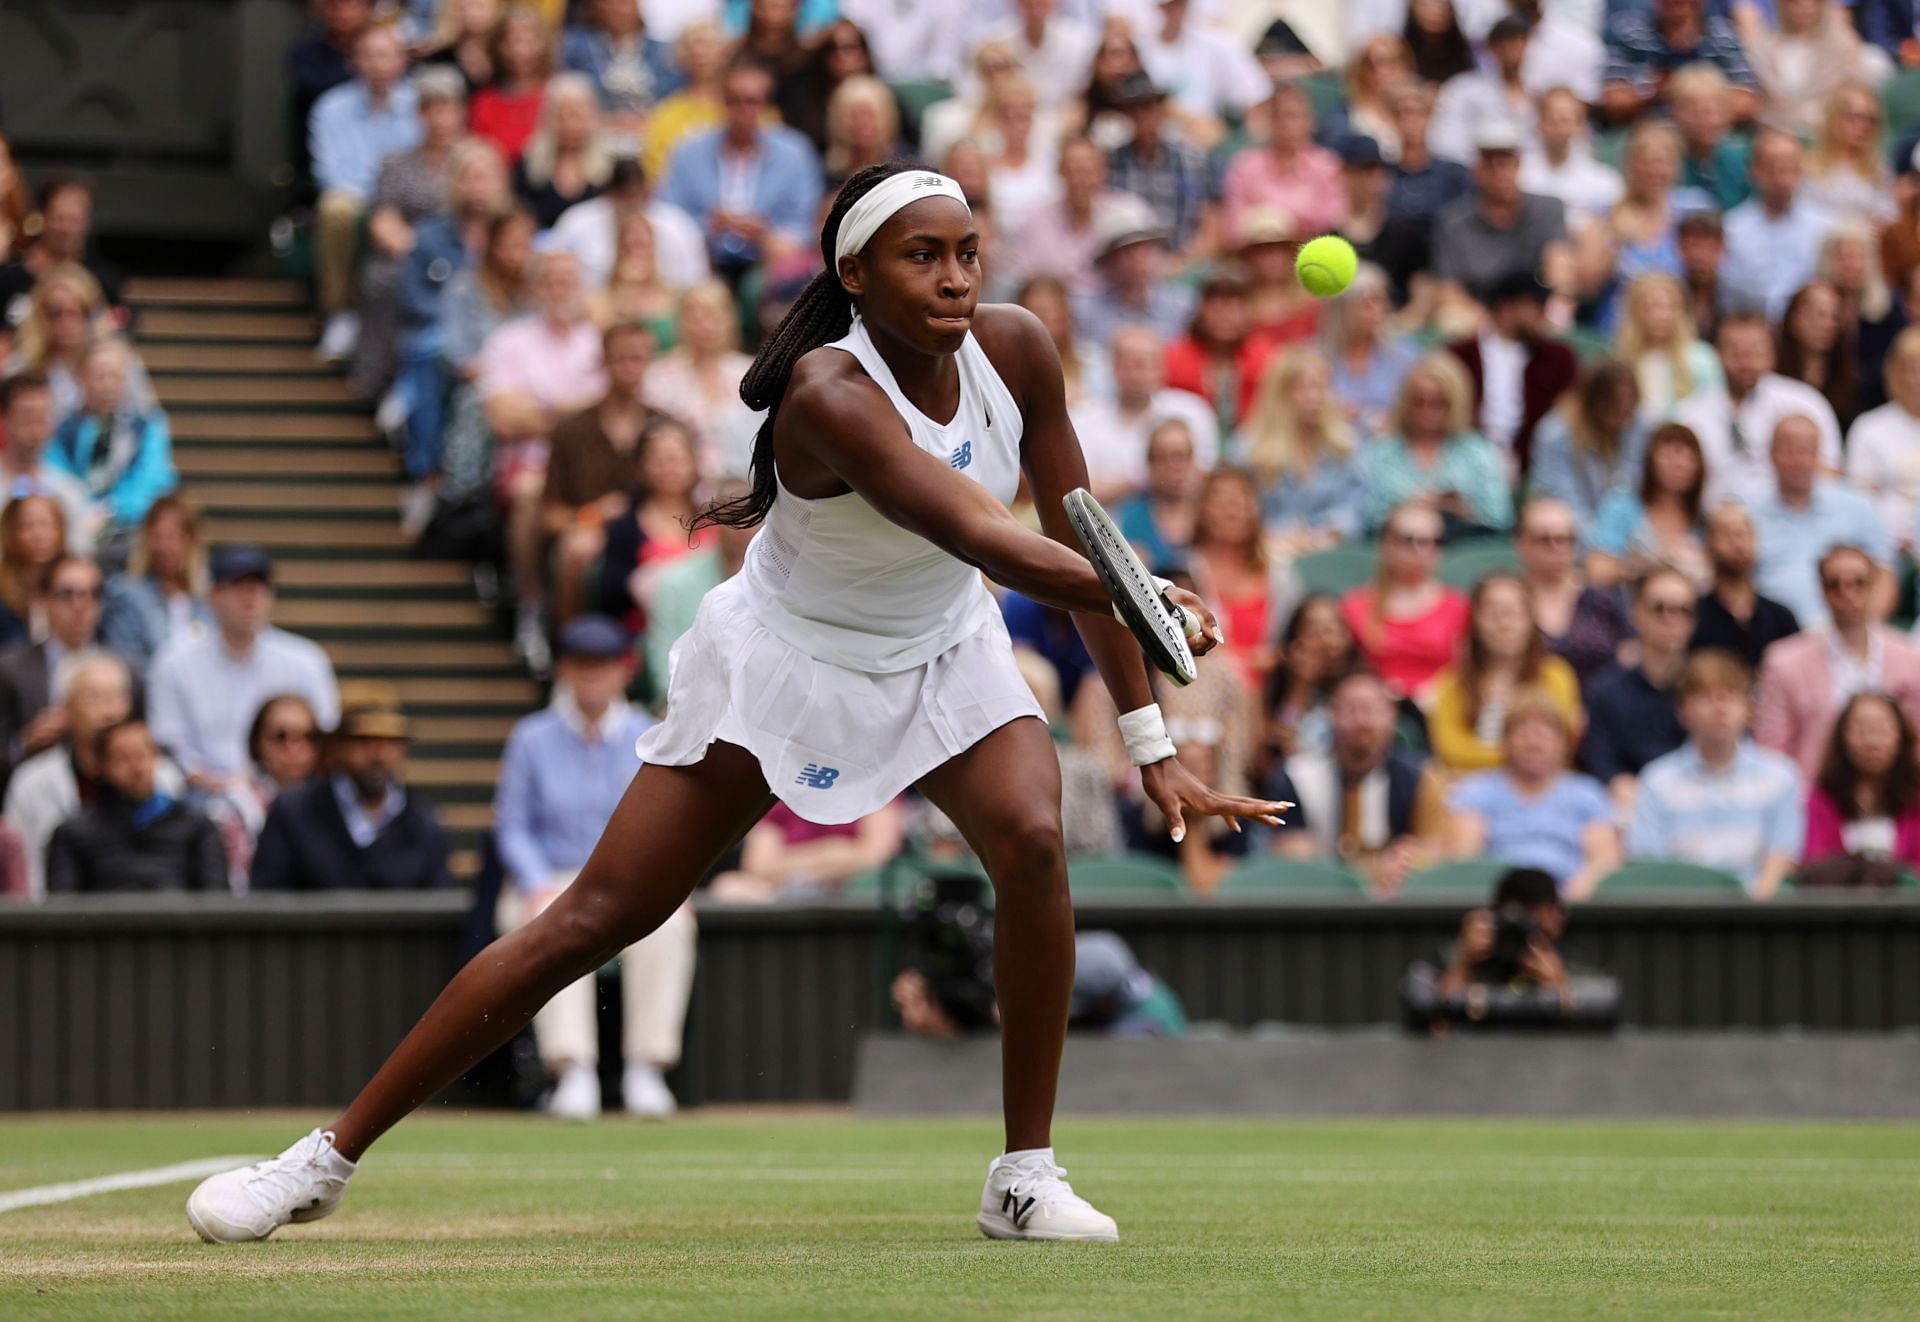 Coco Gauff is ready to make a splash at Wimbledon this year.